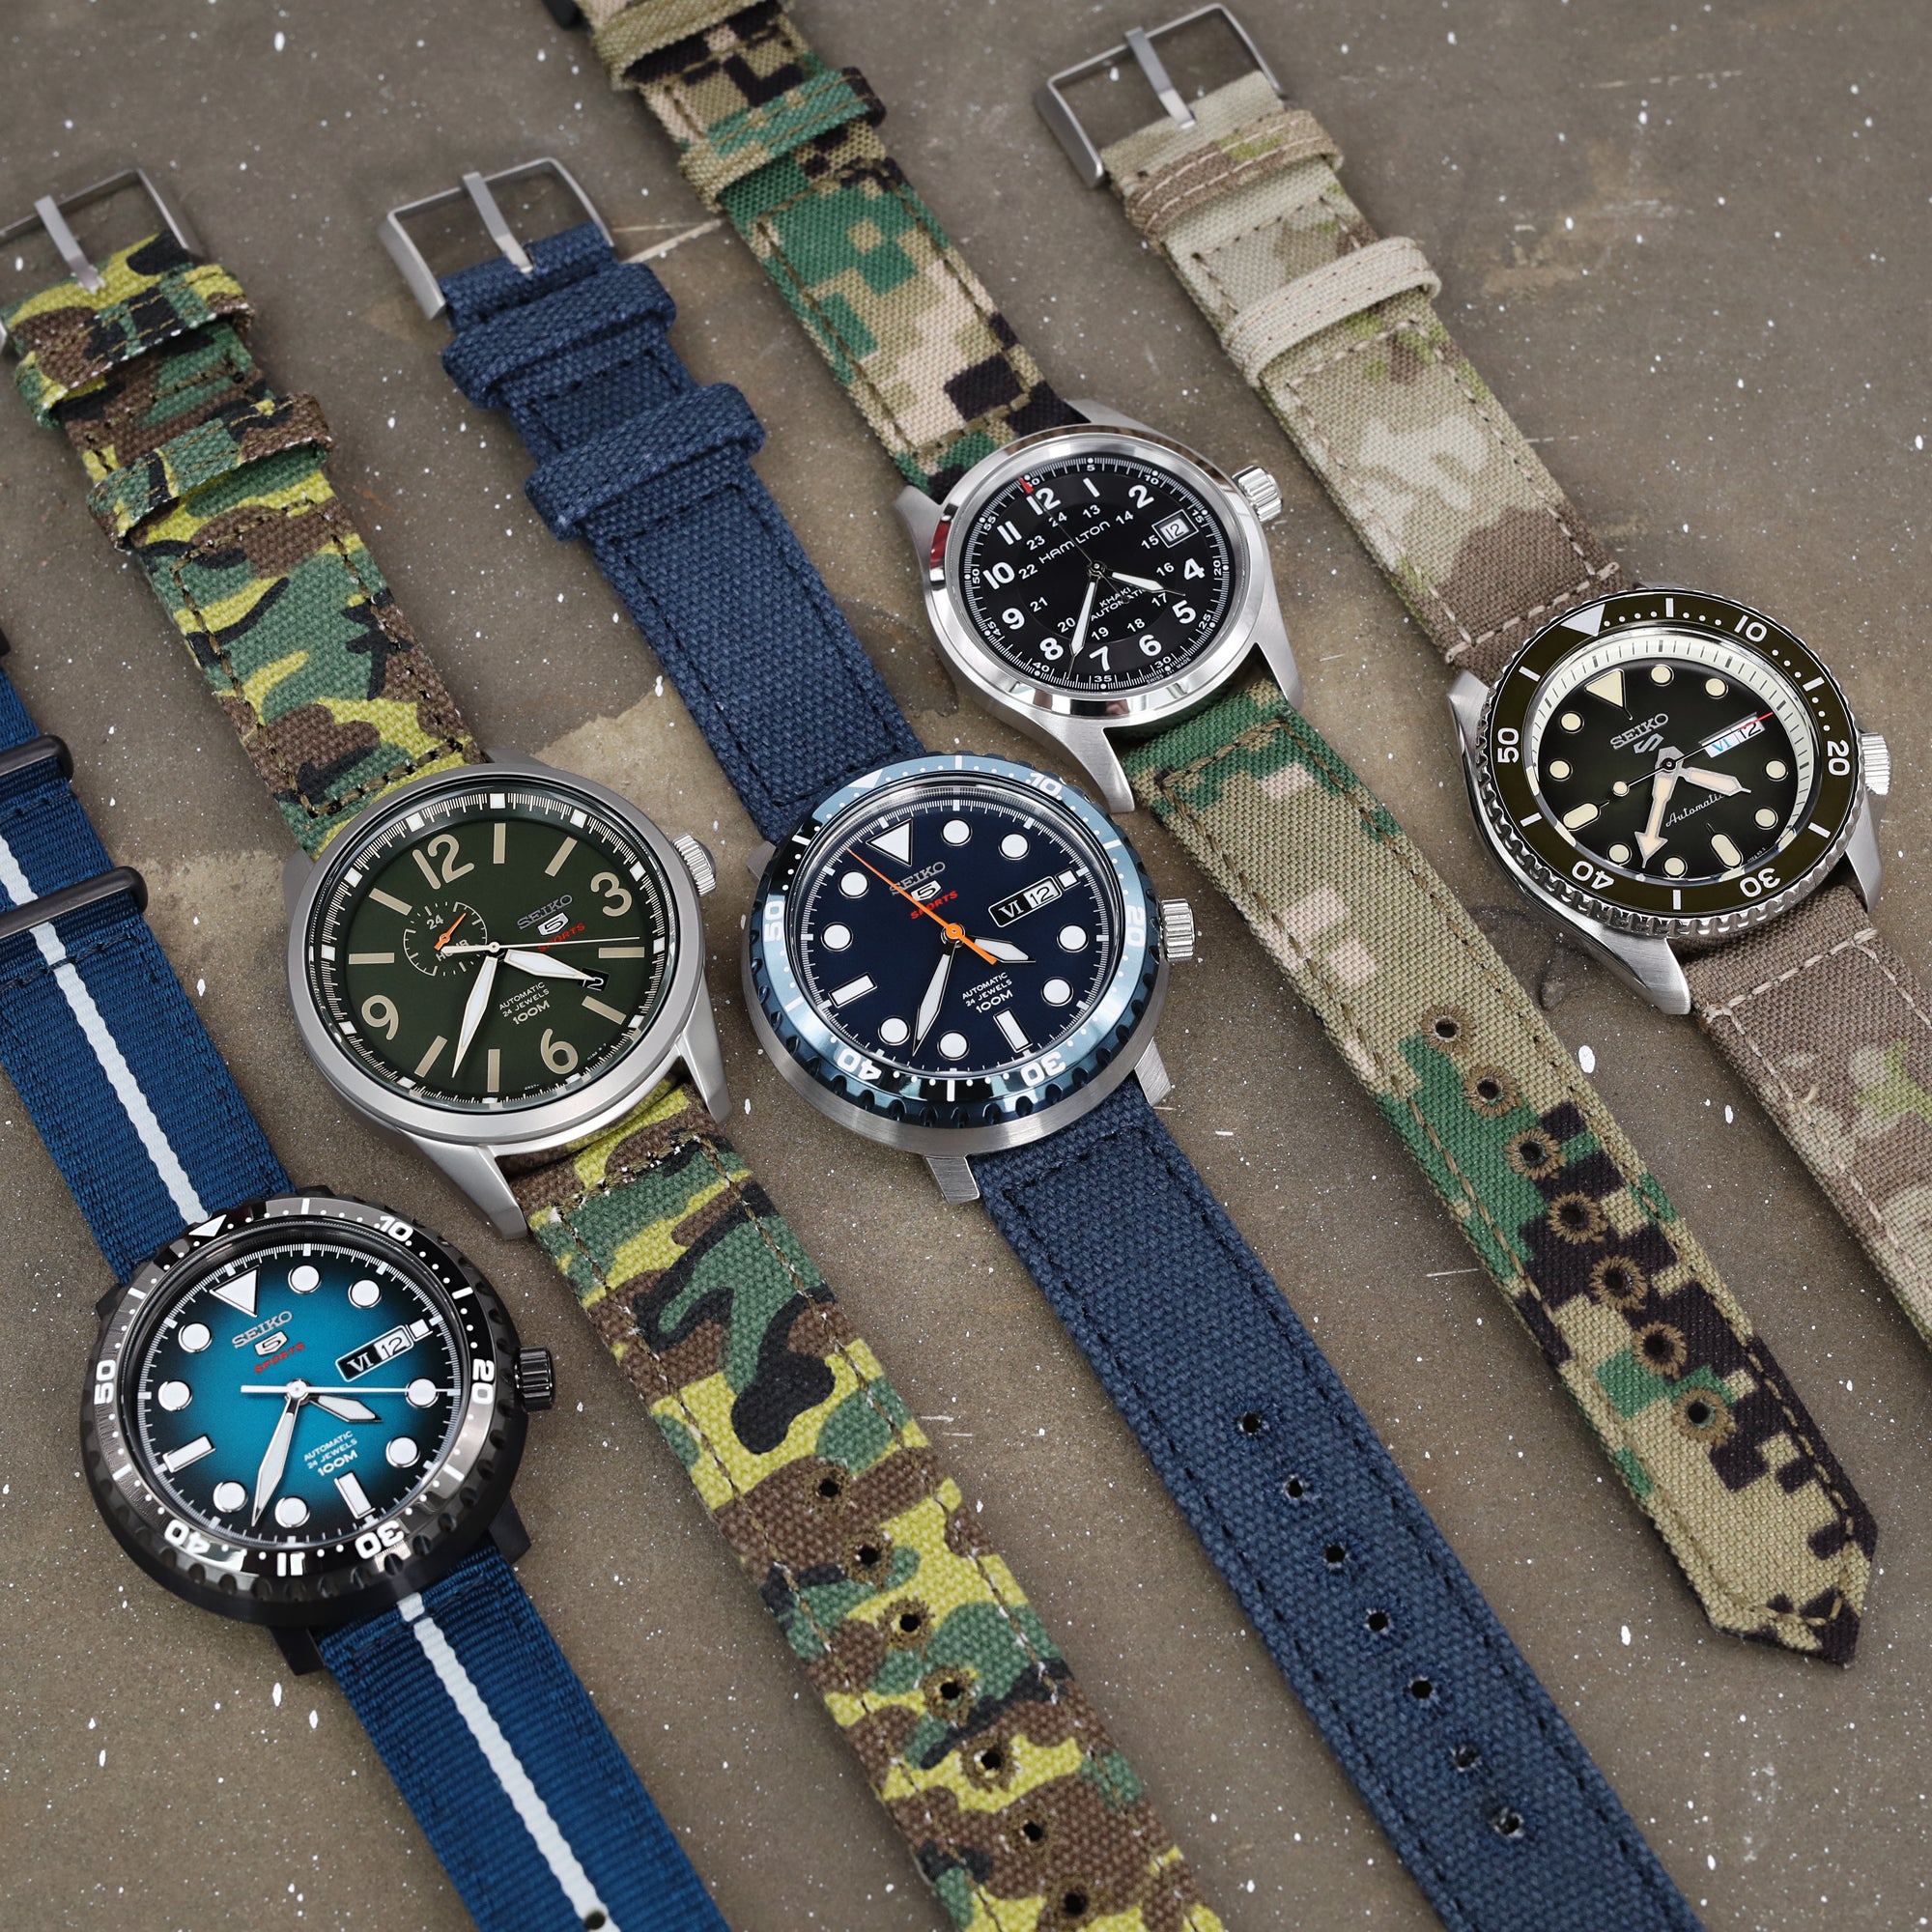 Quarantine At Home With WW2 Collection Watch Straps